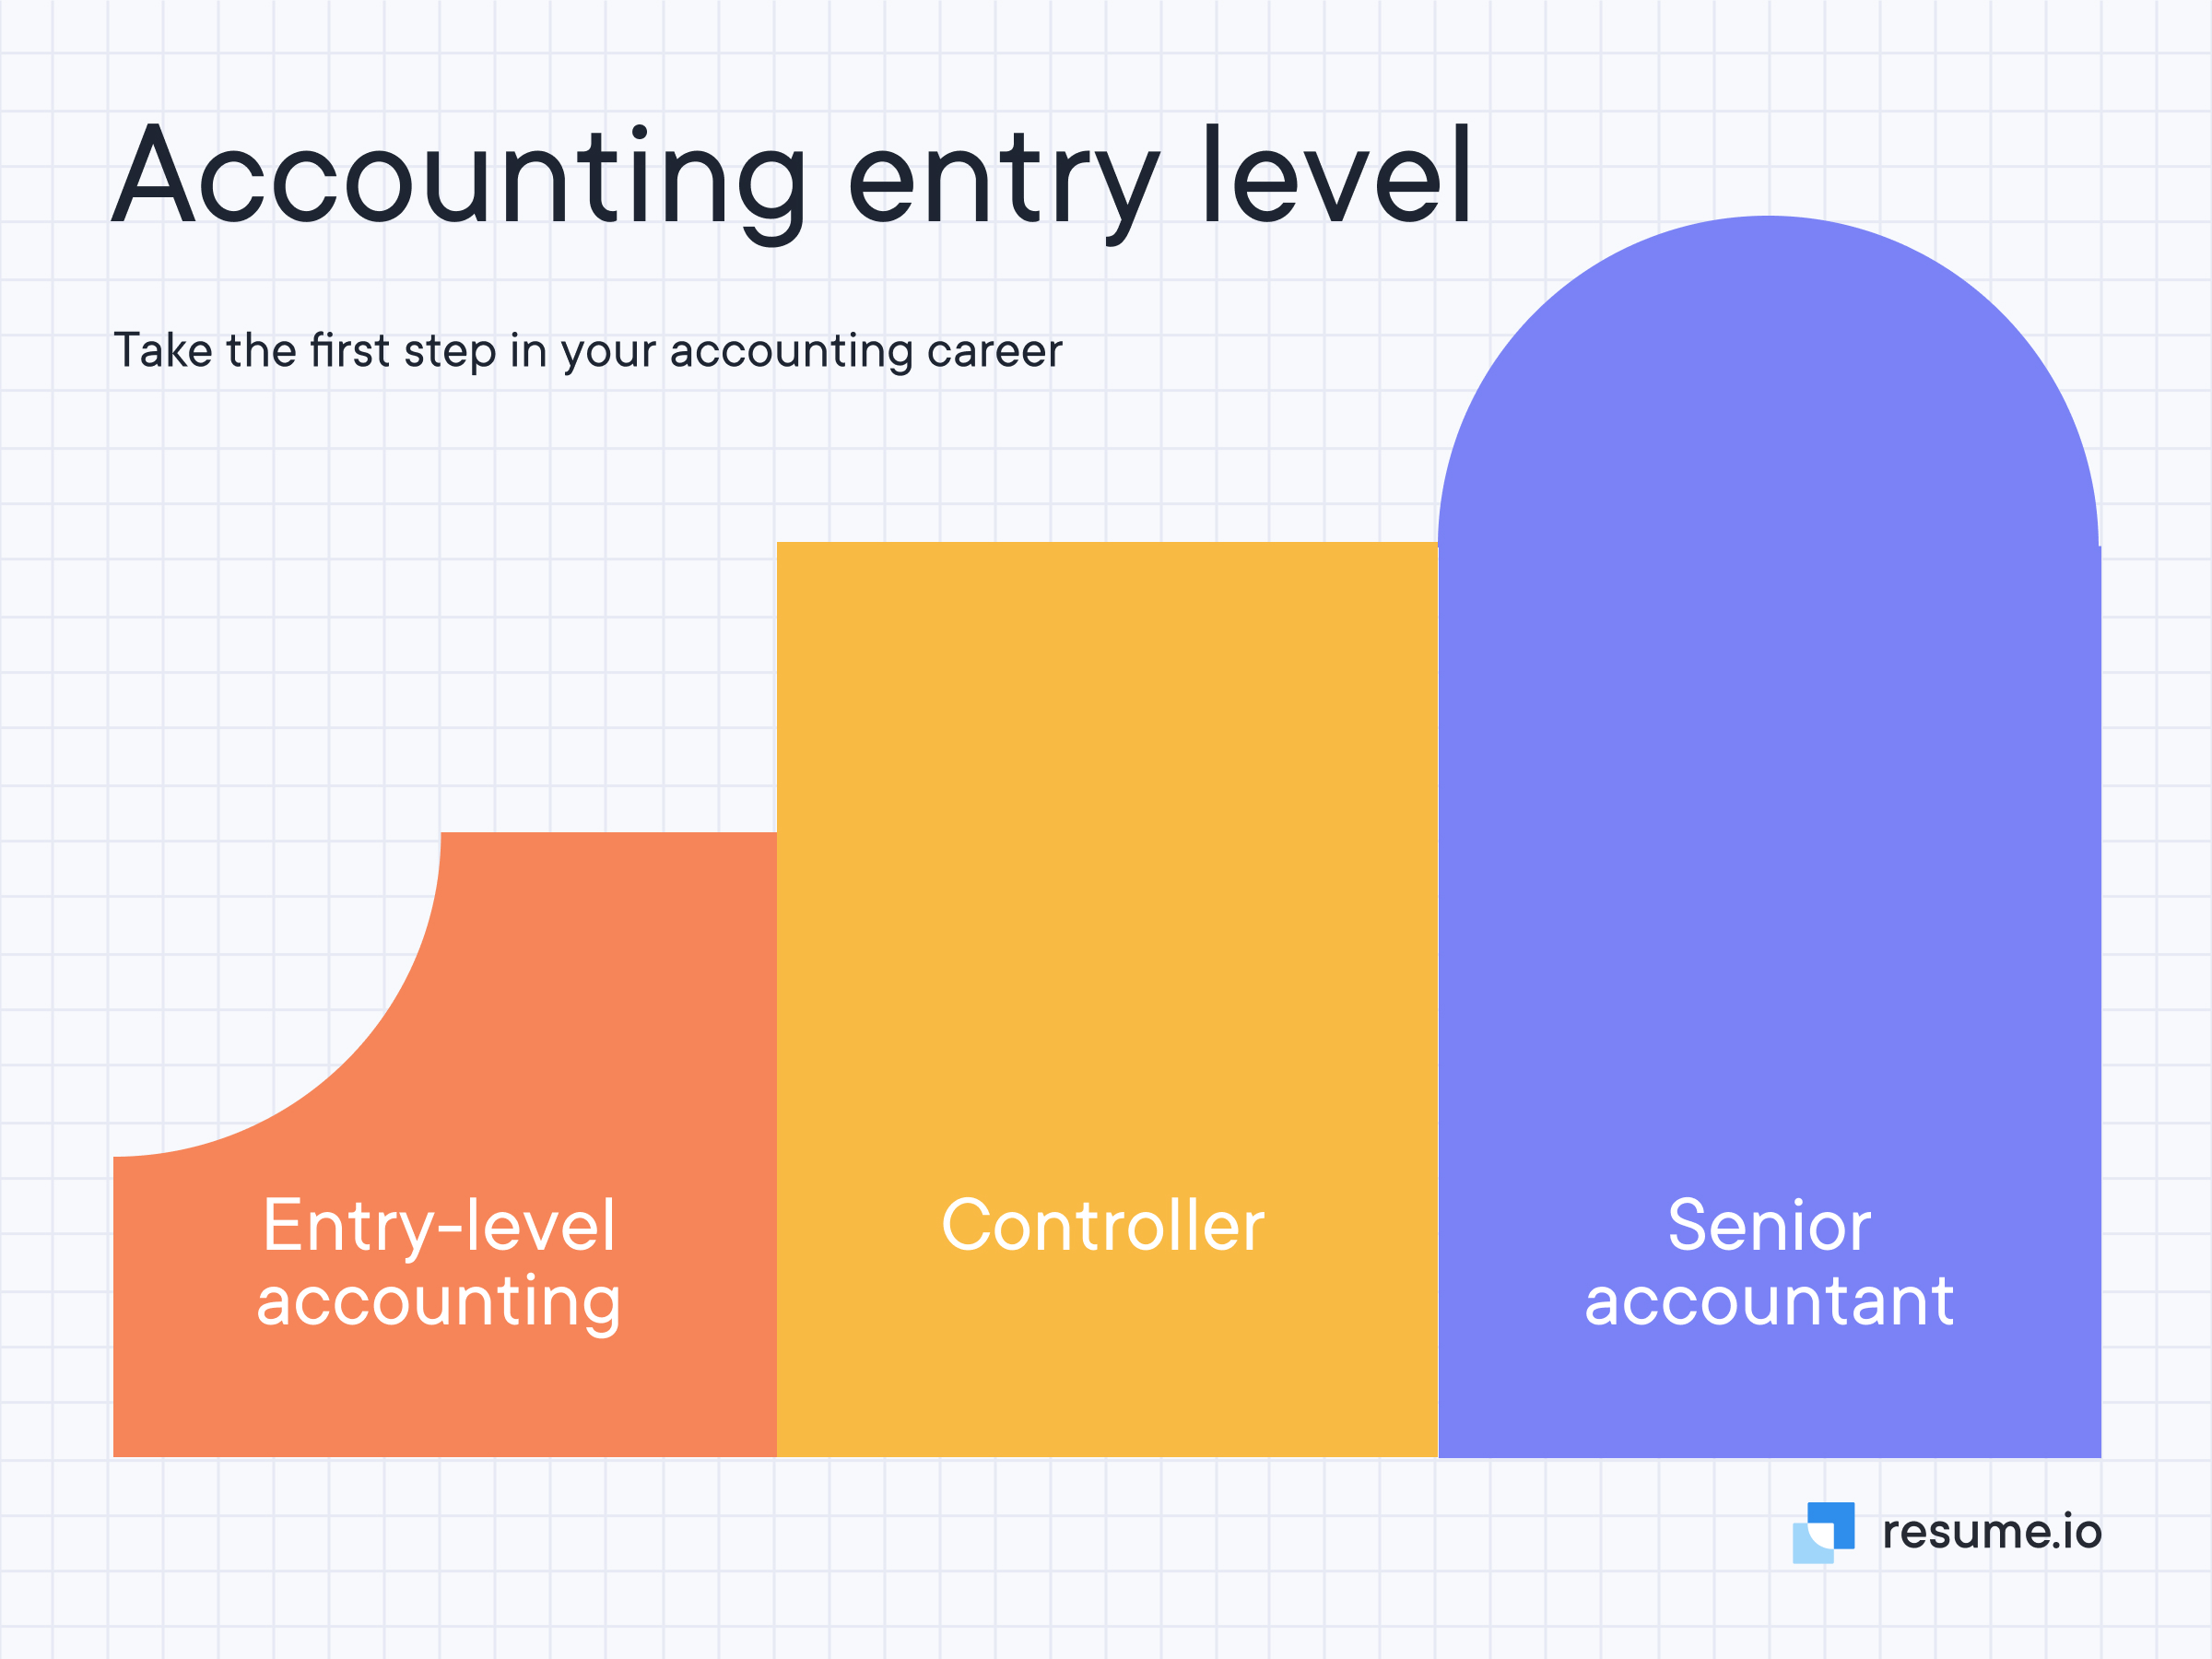 Take the first step in your accounting career as Accounting entry level!